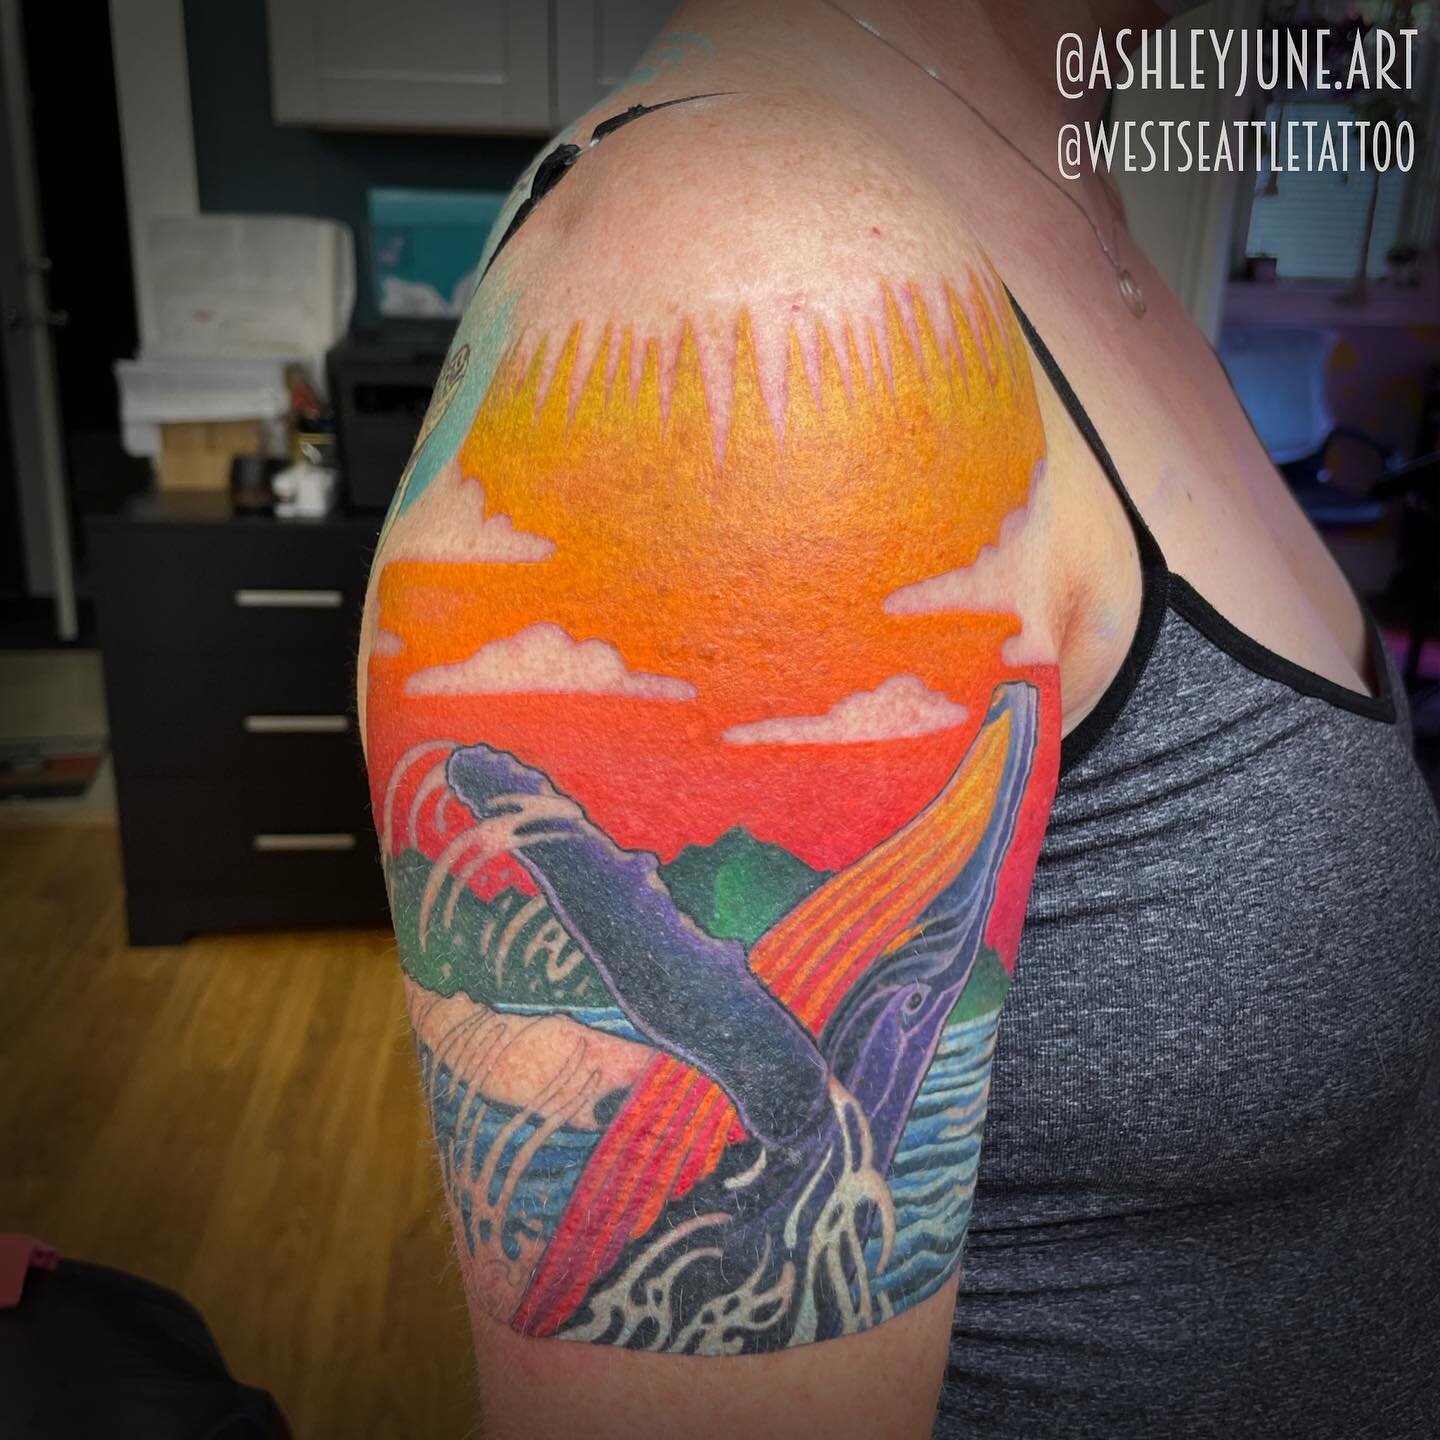 By Ash @ashleyjune.art #Wale watching at its finest! #ocean #sunset #colortattoo

𝙲𝚘𝚖𝚎 𝚏𝚘𝚛 𝚝𝚑𝚎 𝚝𝚊𝚝𝚝𝚘𝚘𝚜 - 𝚛𝚎𝚝𝚞𝚛𝚗 𝚏𝚘𝚛 𝚝𝚑𝚎 𝚎𝚡𝚙𝚎𝚛𝚒𝚎𝚗𝚌𝚎. 𝑩𝒐𝒐𝒌𝒊𝒏𝒈 &amp; 𝓘𝓷𝓺𝓾𝓲𝓻𝓲𝓮𝓼:&nbsp;&nbsp;EMAIL westseattletattoo@gma